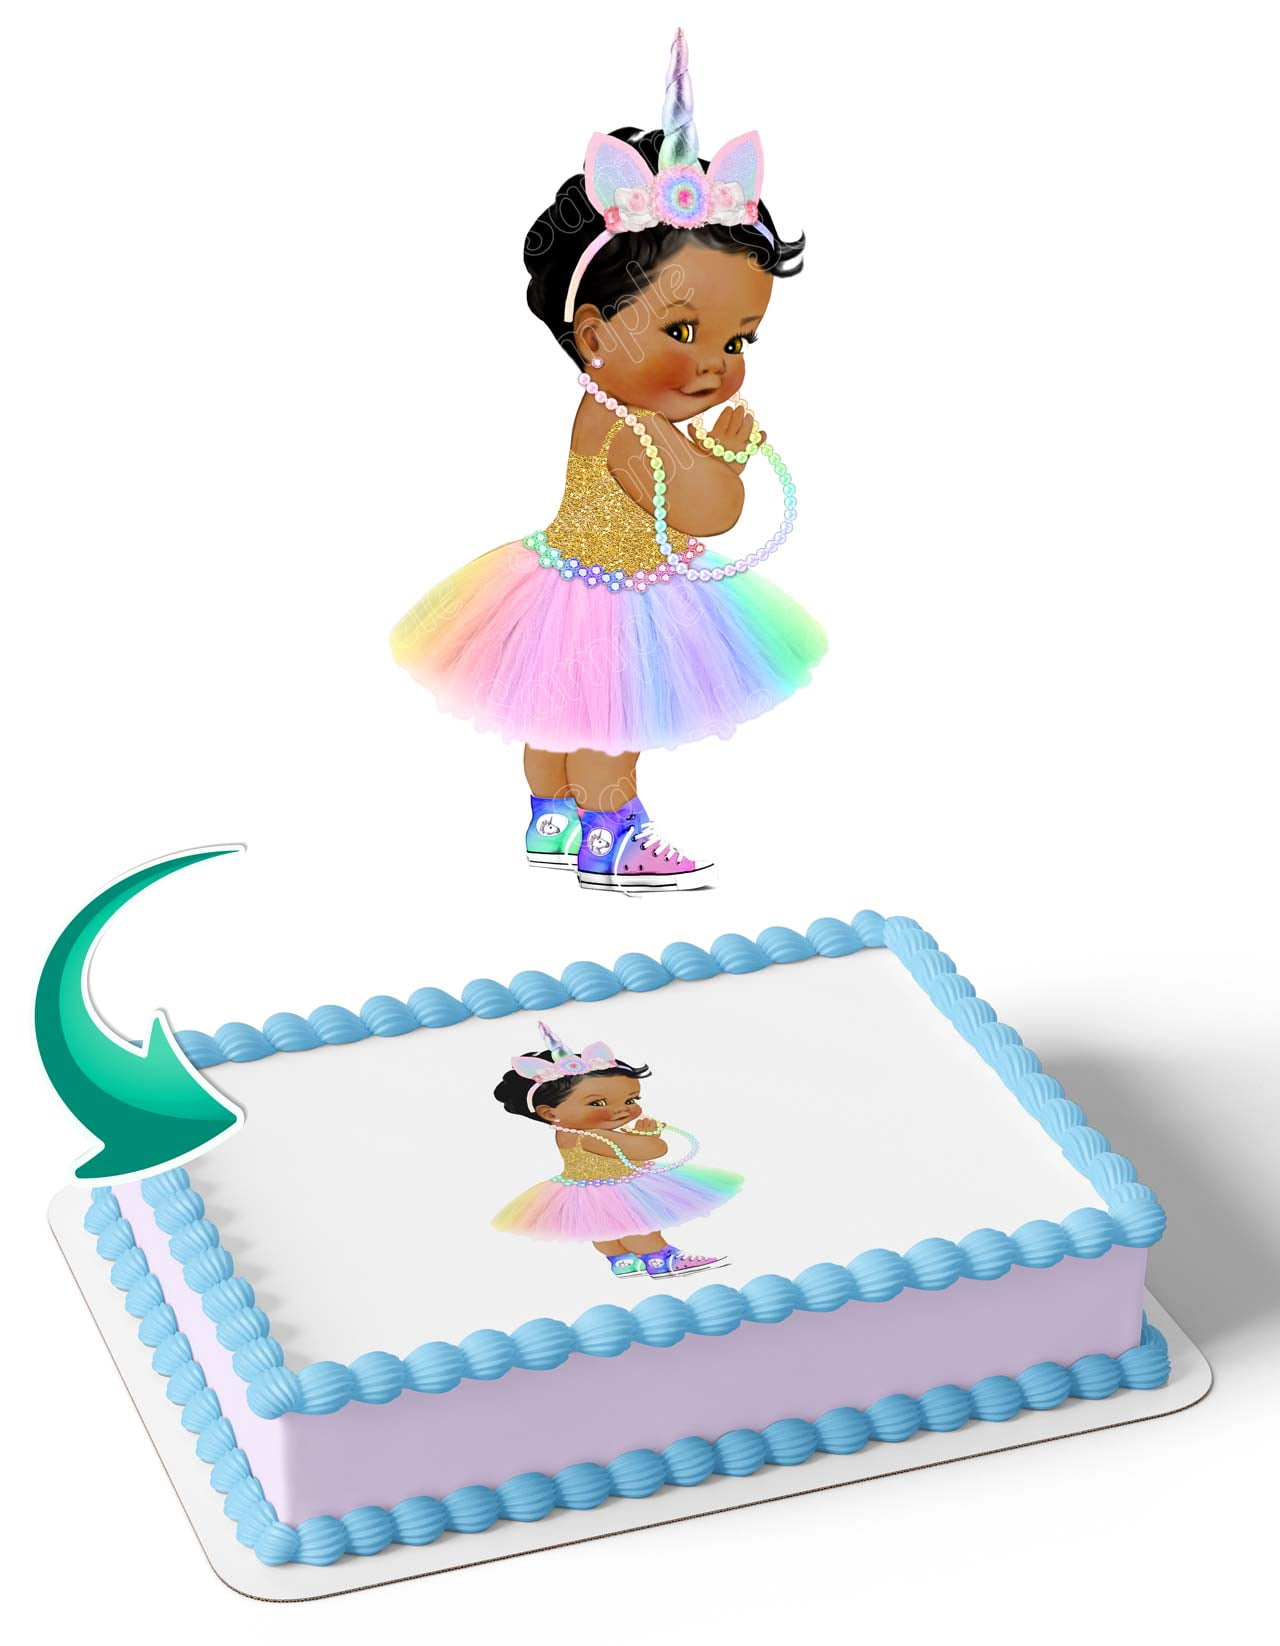 Glitter Disney Once Upon a Time Princess Cake Topper 6in x 5in